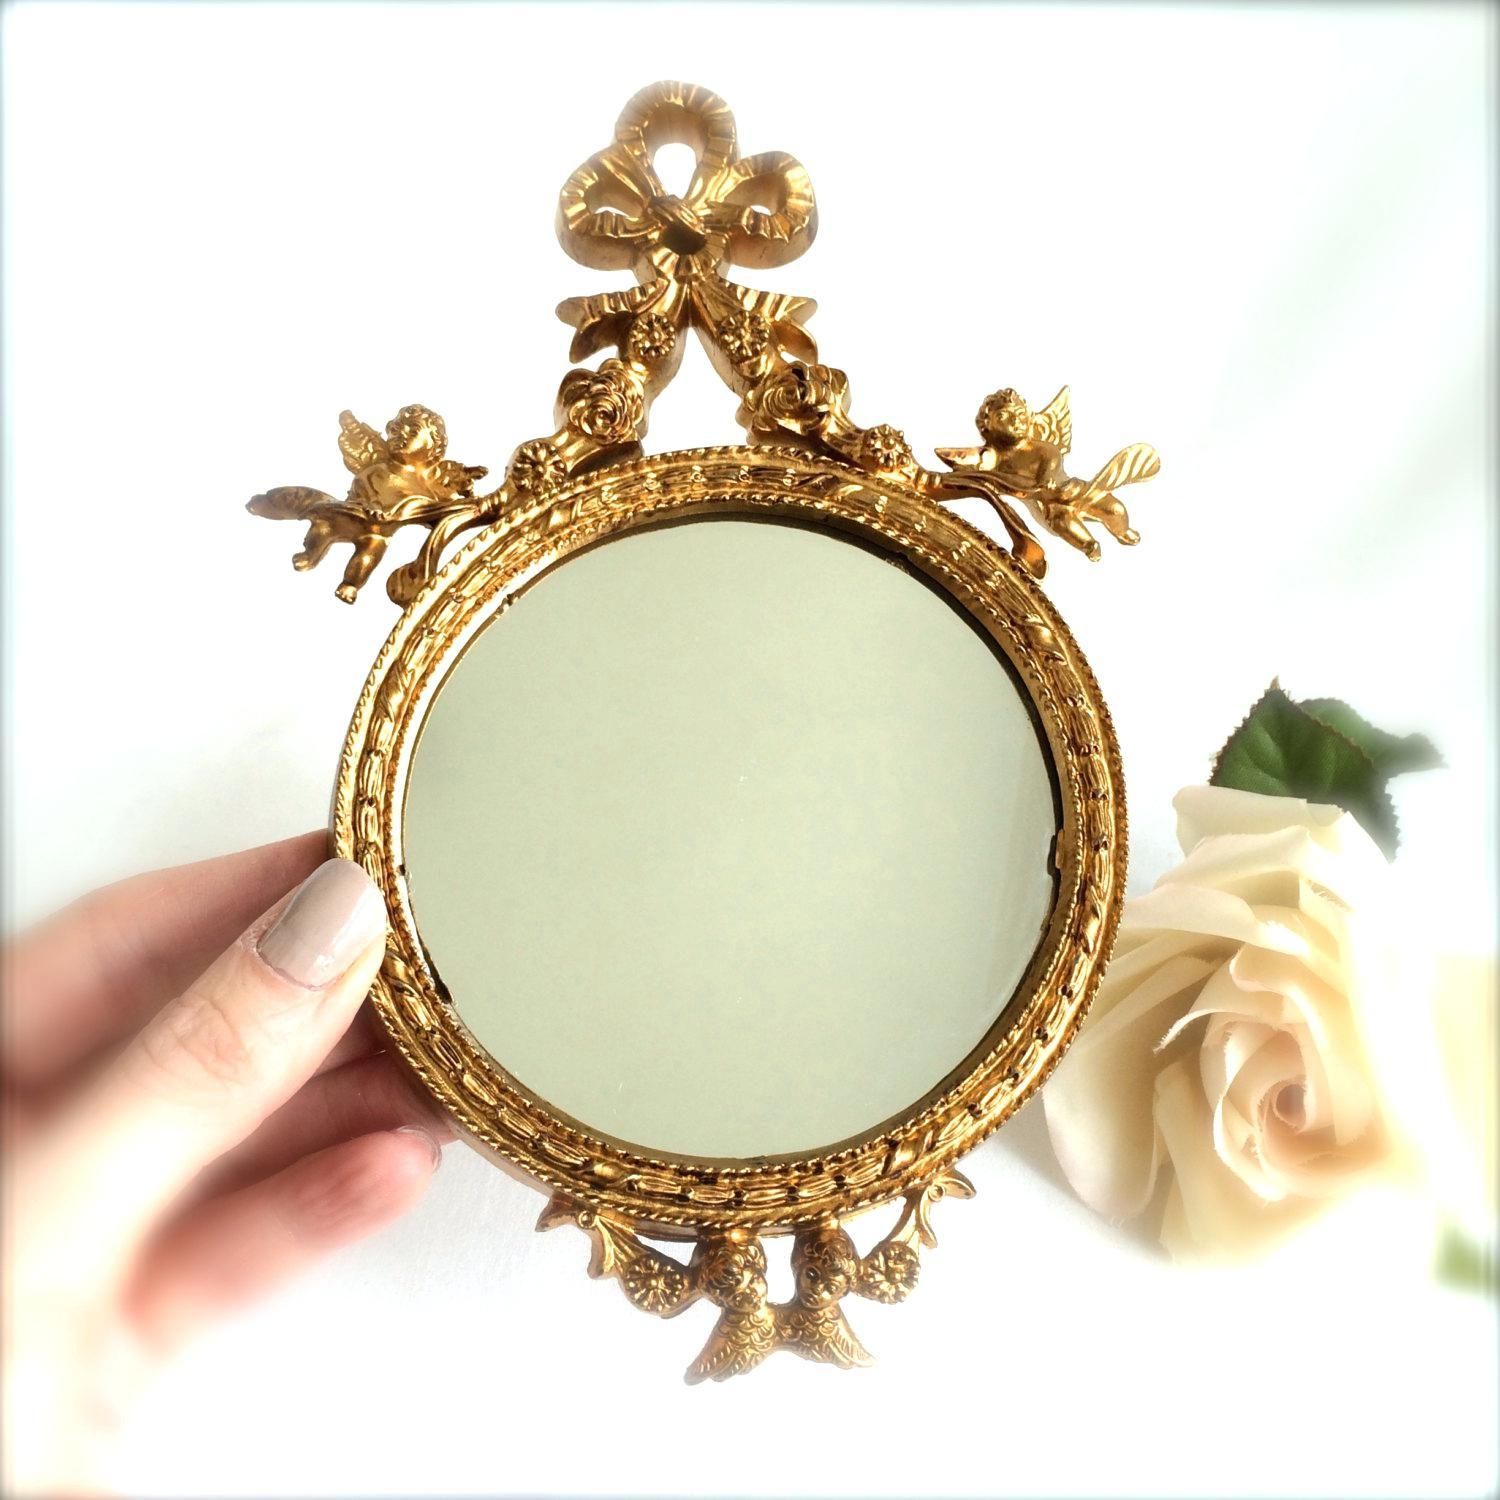 11 H Mirror Gold Oval Italian Vintage Decorative Upcycle Ornate With Regard To Ornate Wall Mirrors (Photo 20 of 20)